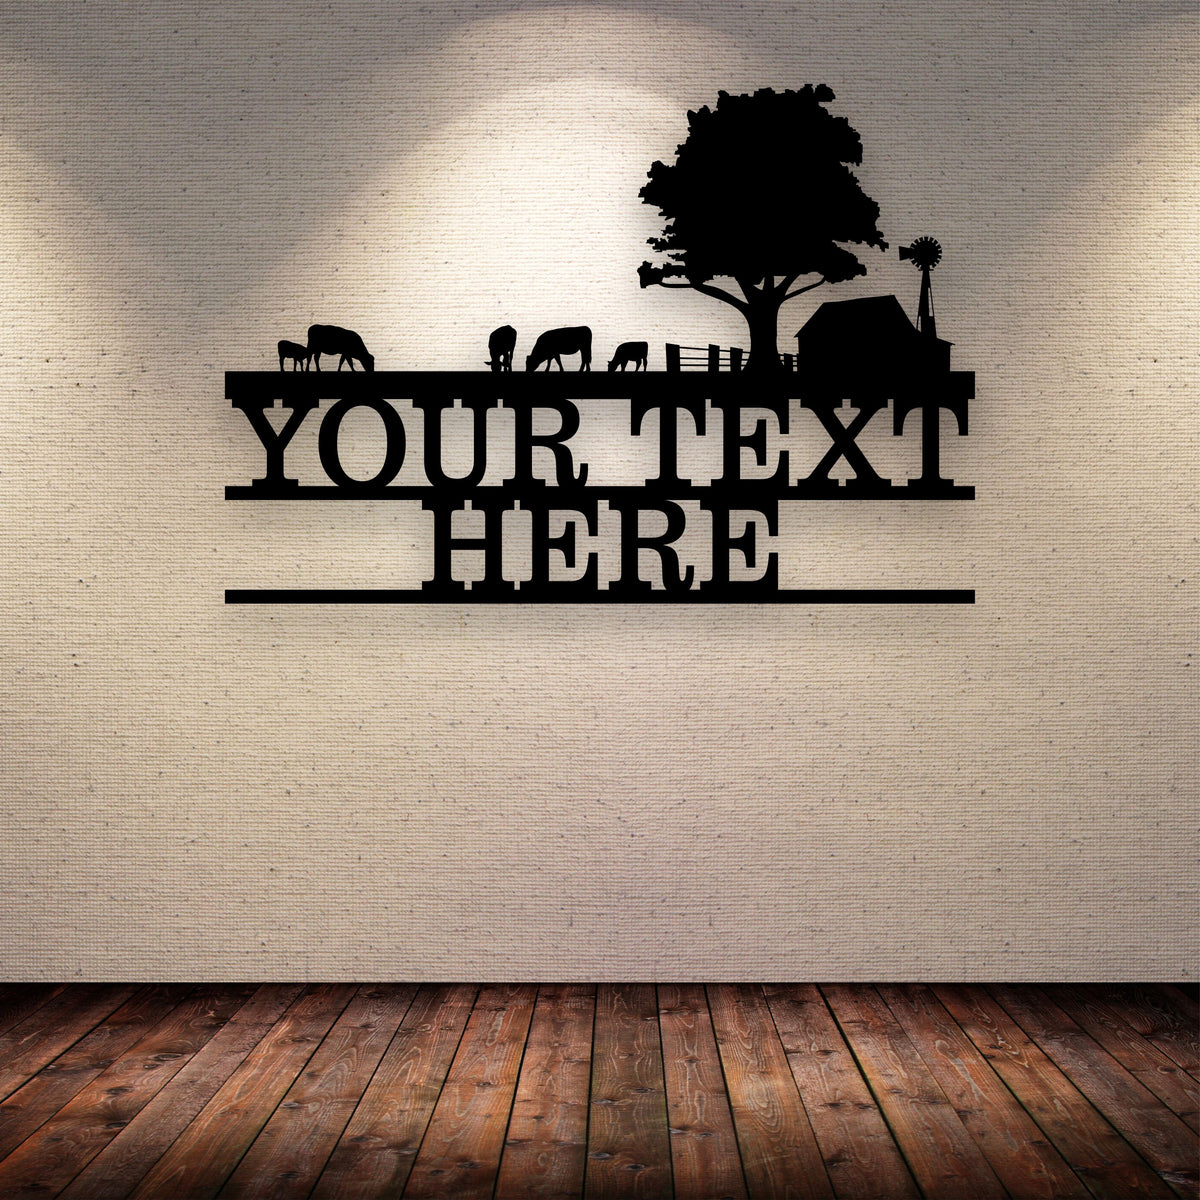 Cattle Farm Barn Your Text Here Metal Wall Art Free Shipping